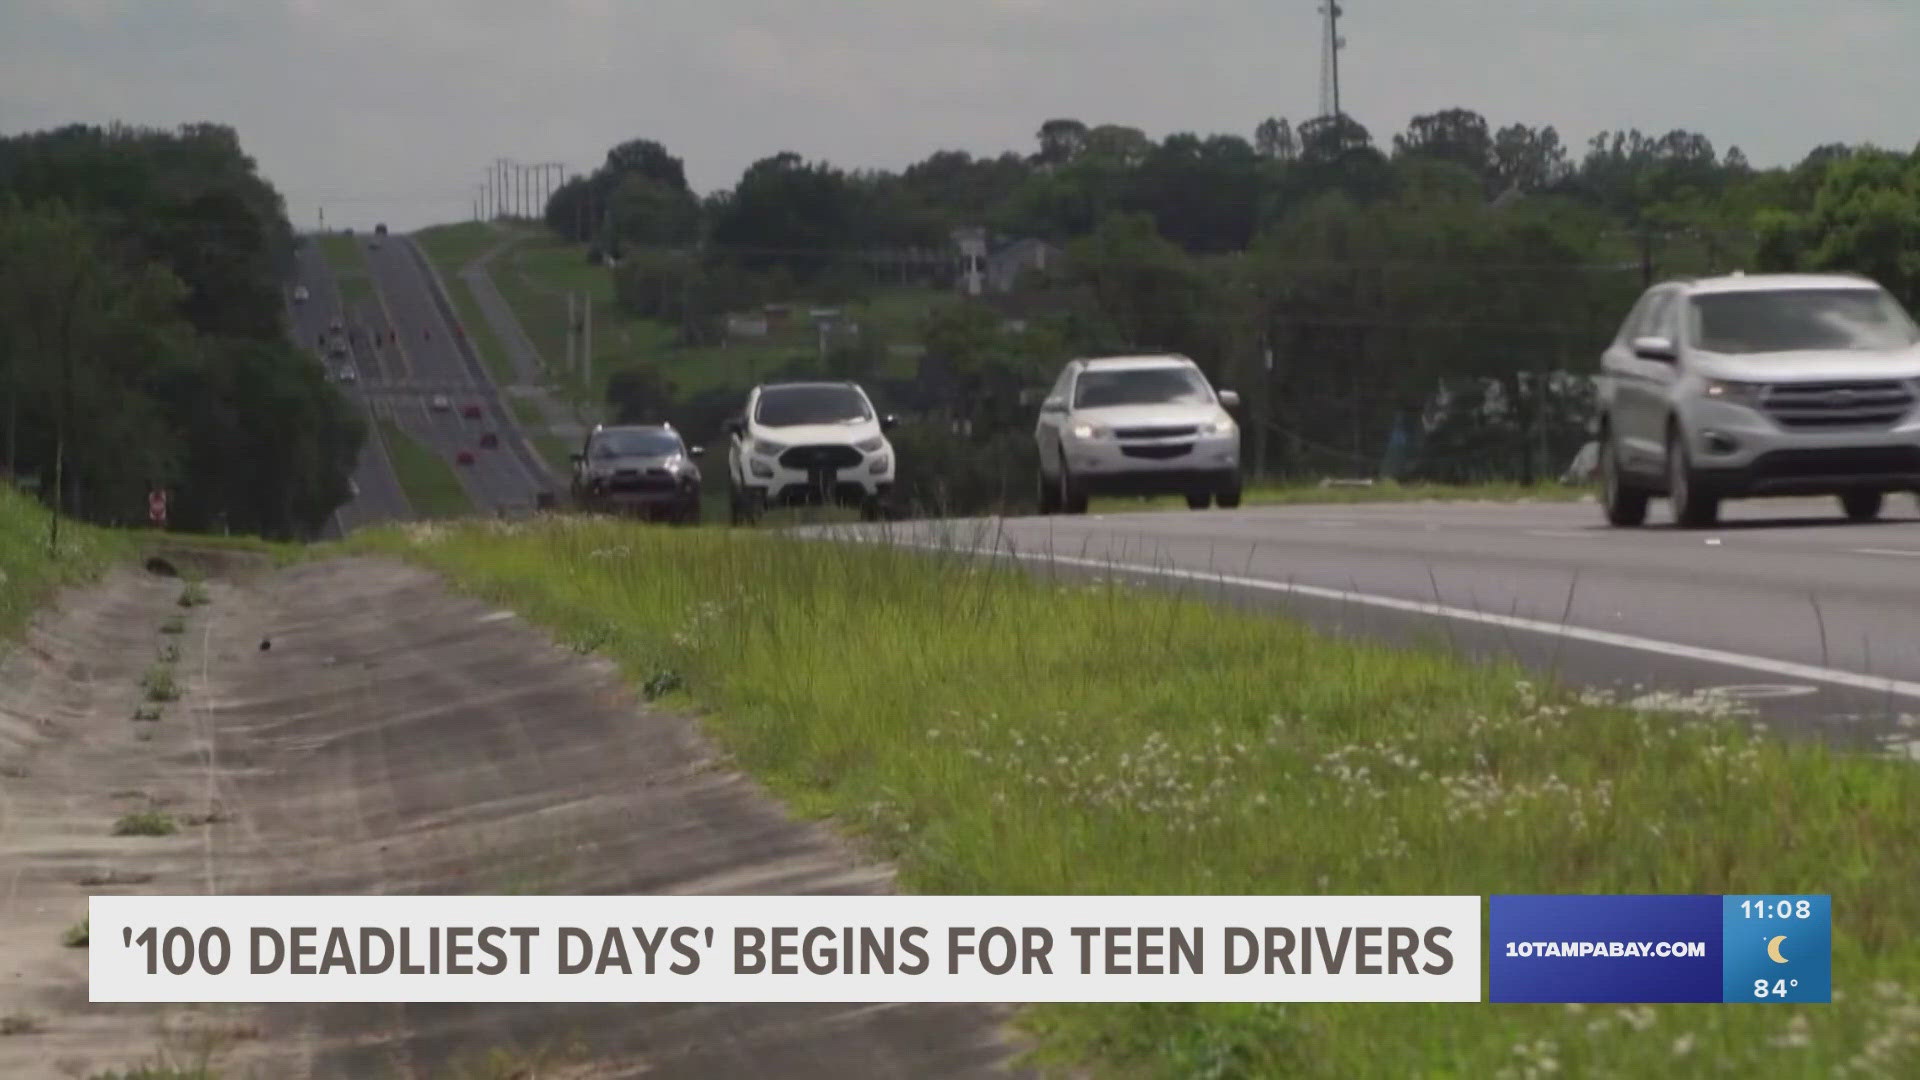 The time between Memorial Day and Labor Day is the deadliest part of the year for teenage drivers.